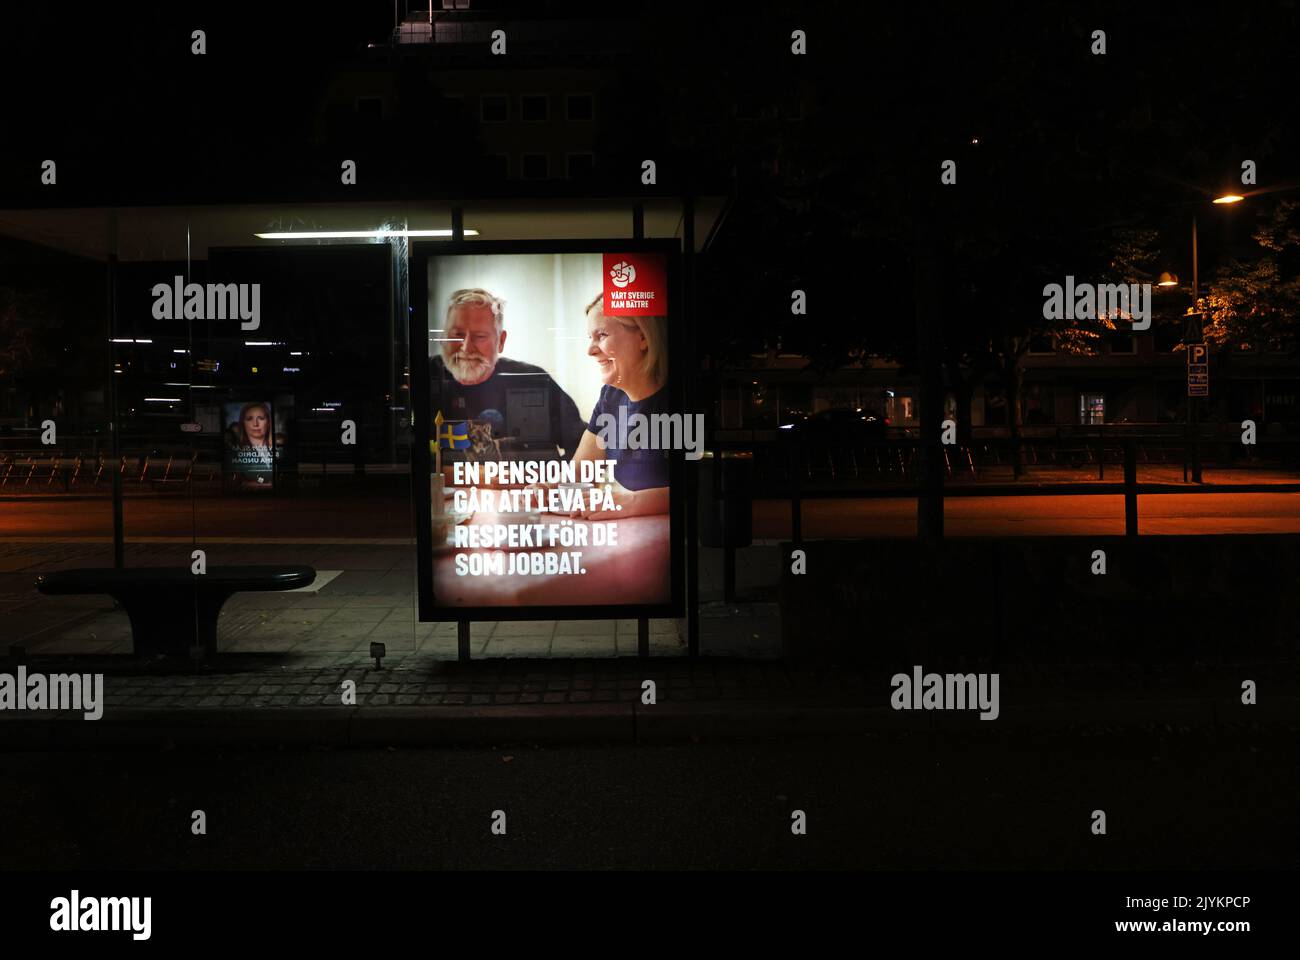 The Swedish parliamentary election takes place on Sunday, September 11. Here you can see election advertising, at a bus station, from different political parties. In the picture: Swedish Prime Minister Magdalena Andersson (s), from The Swedish Social Democratic Party. Stock Photo